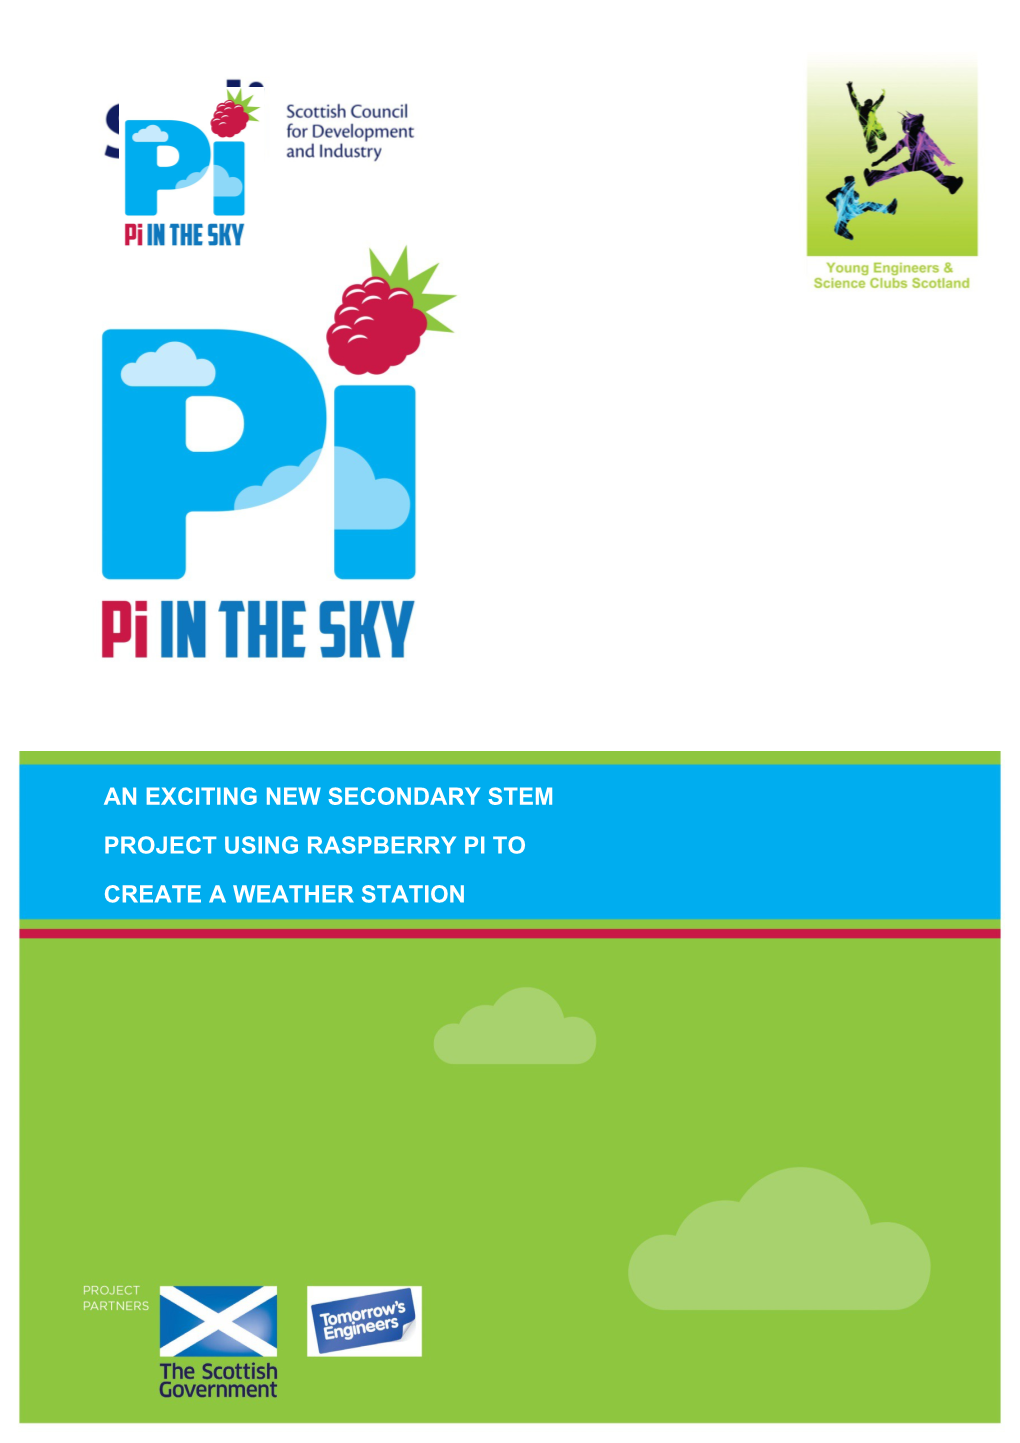 Pi in the Sky Is an Exciting New Secondary STEM Project, Developed by Young Engineers And